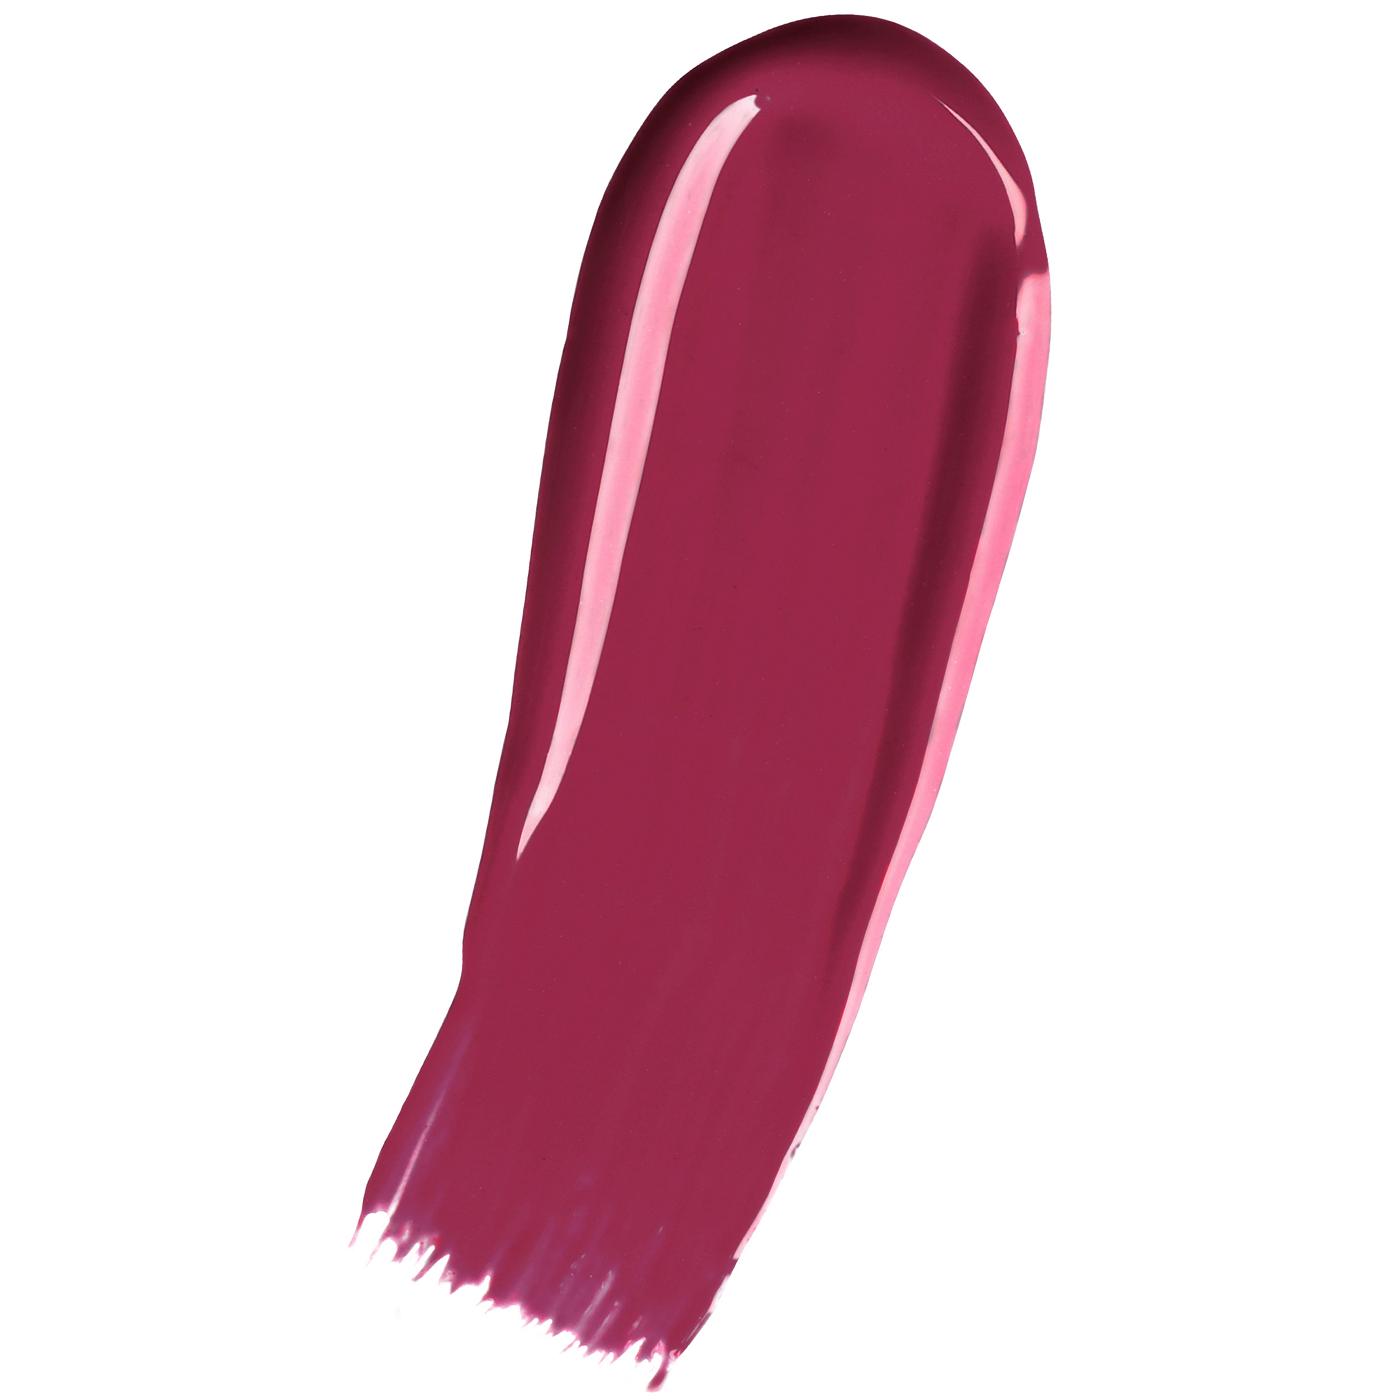 Maybelline Super Stay 24 2-Step Liquid Lipstick - Relentless Ruby; image 2 of 3